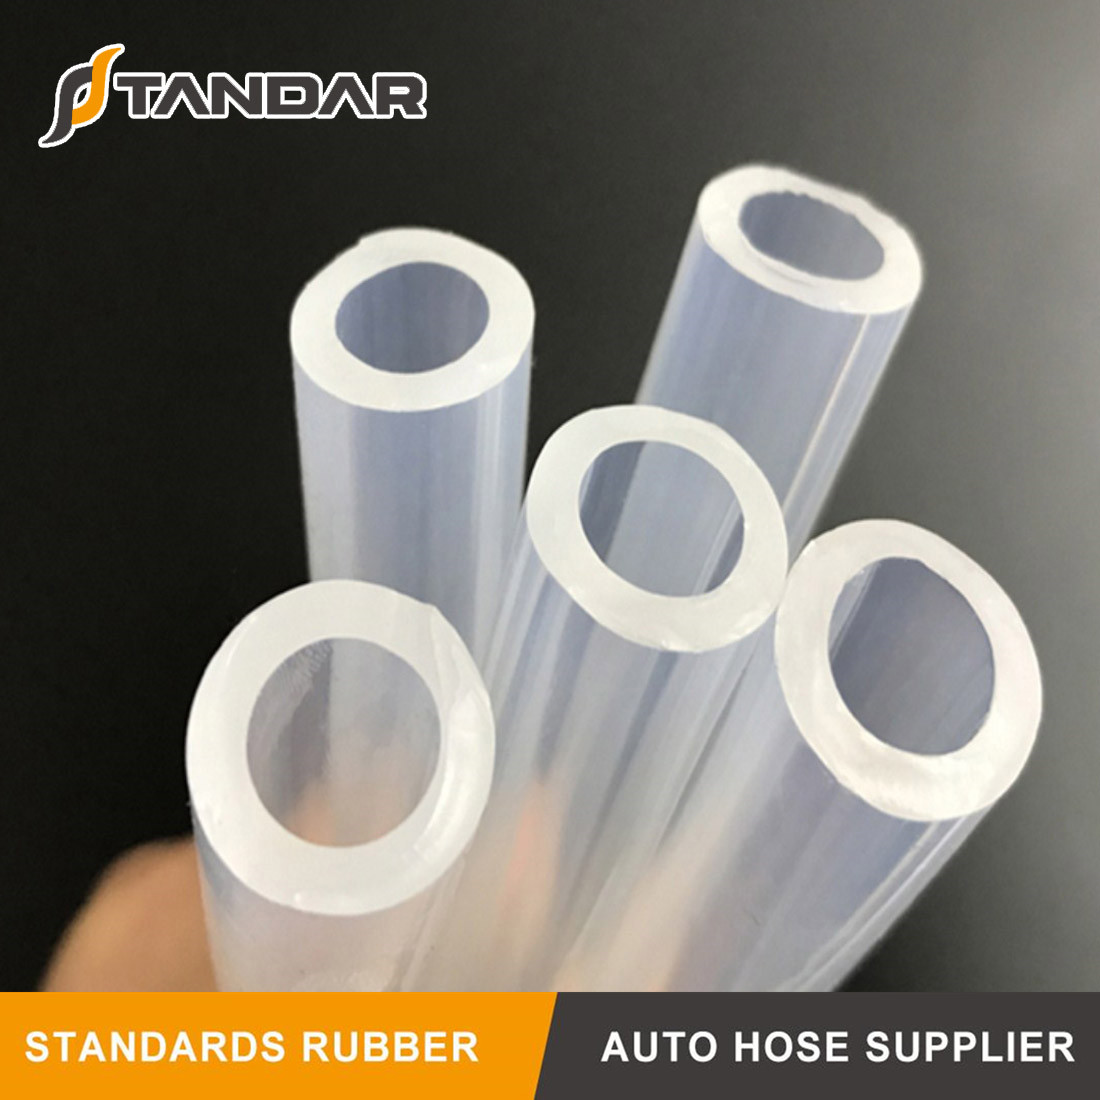 How to choose medical device silicone tubing?